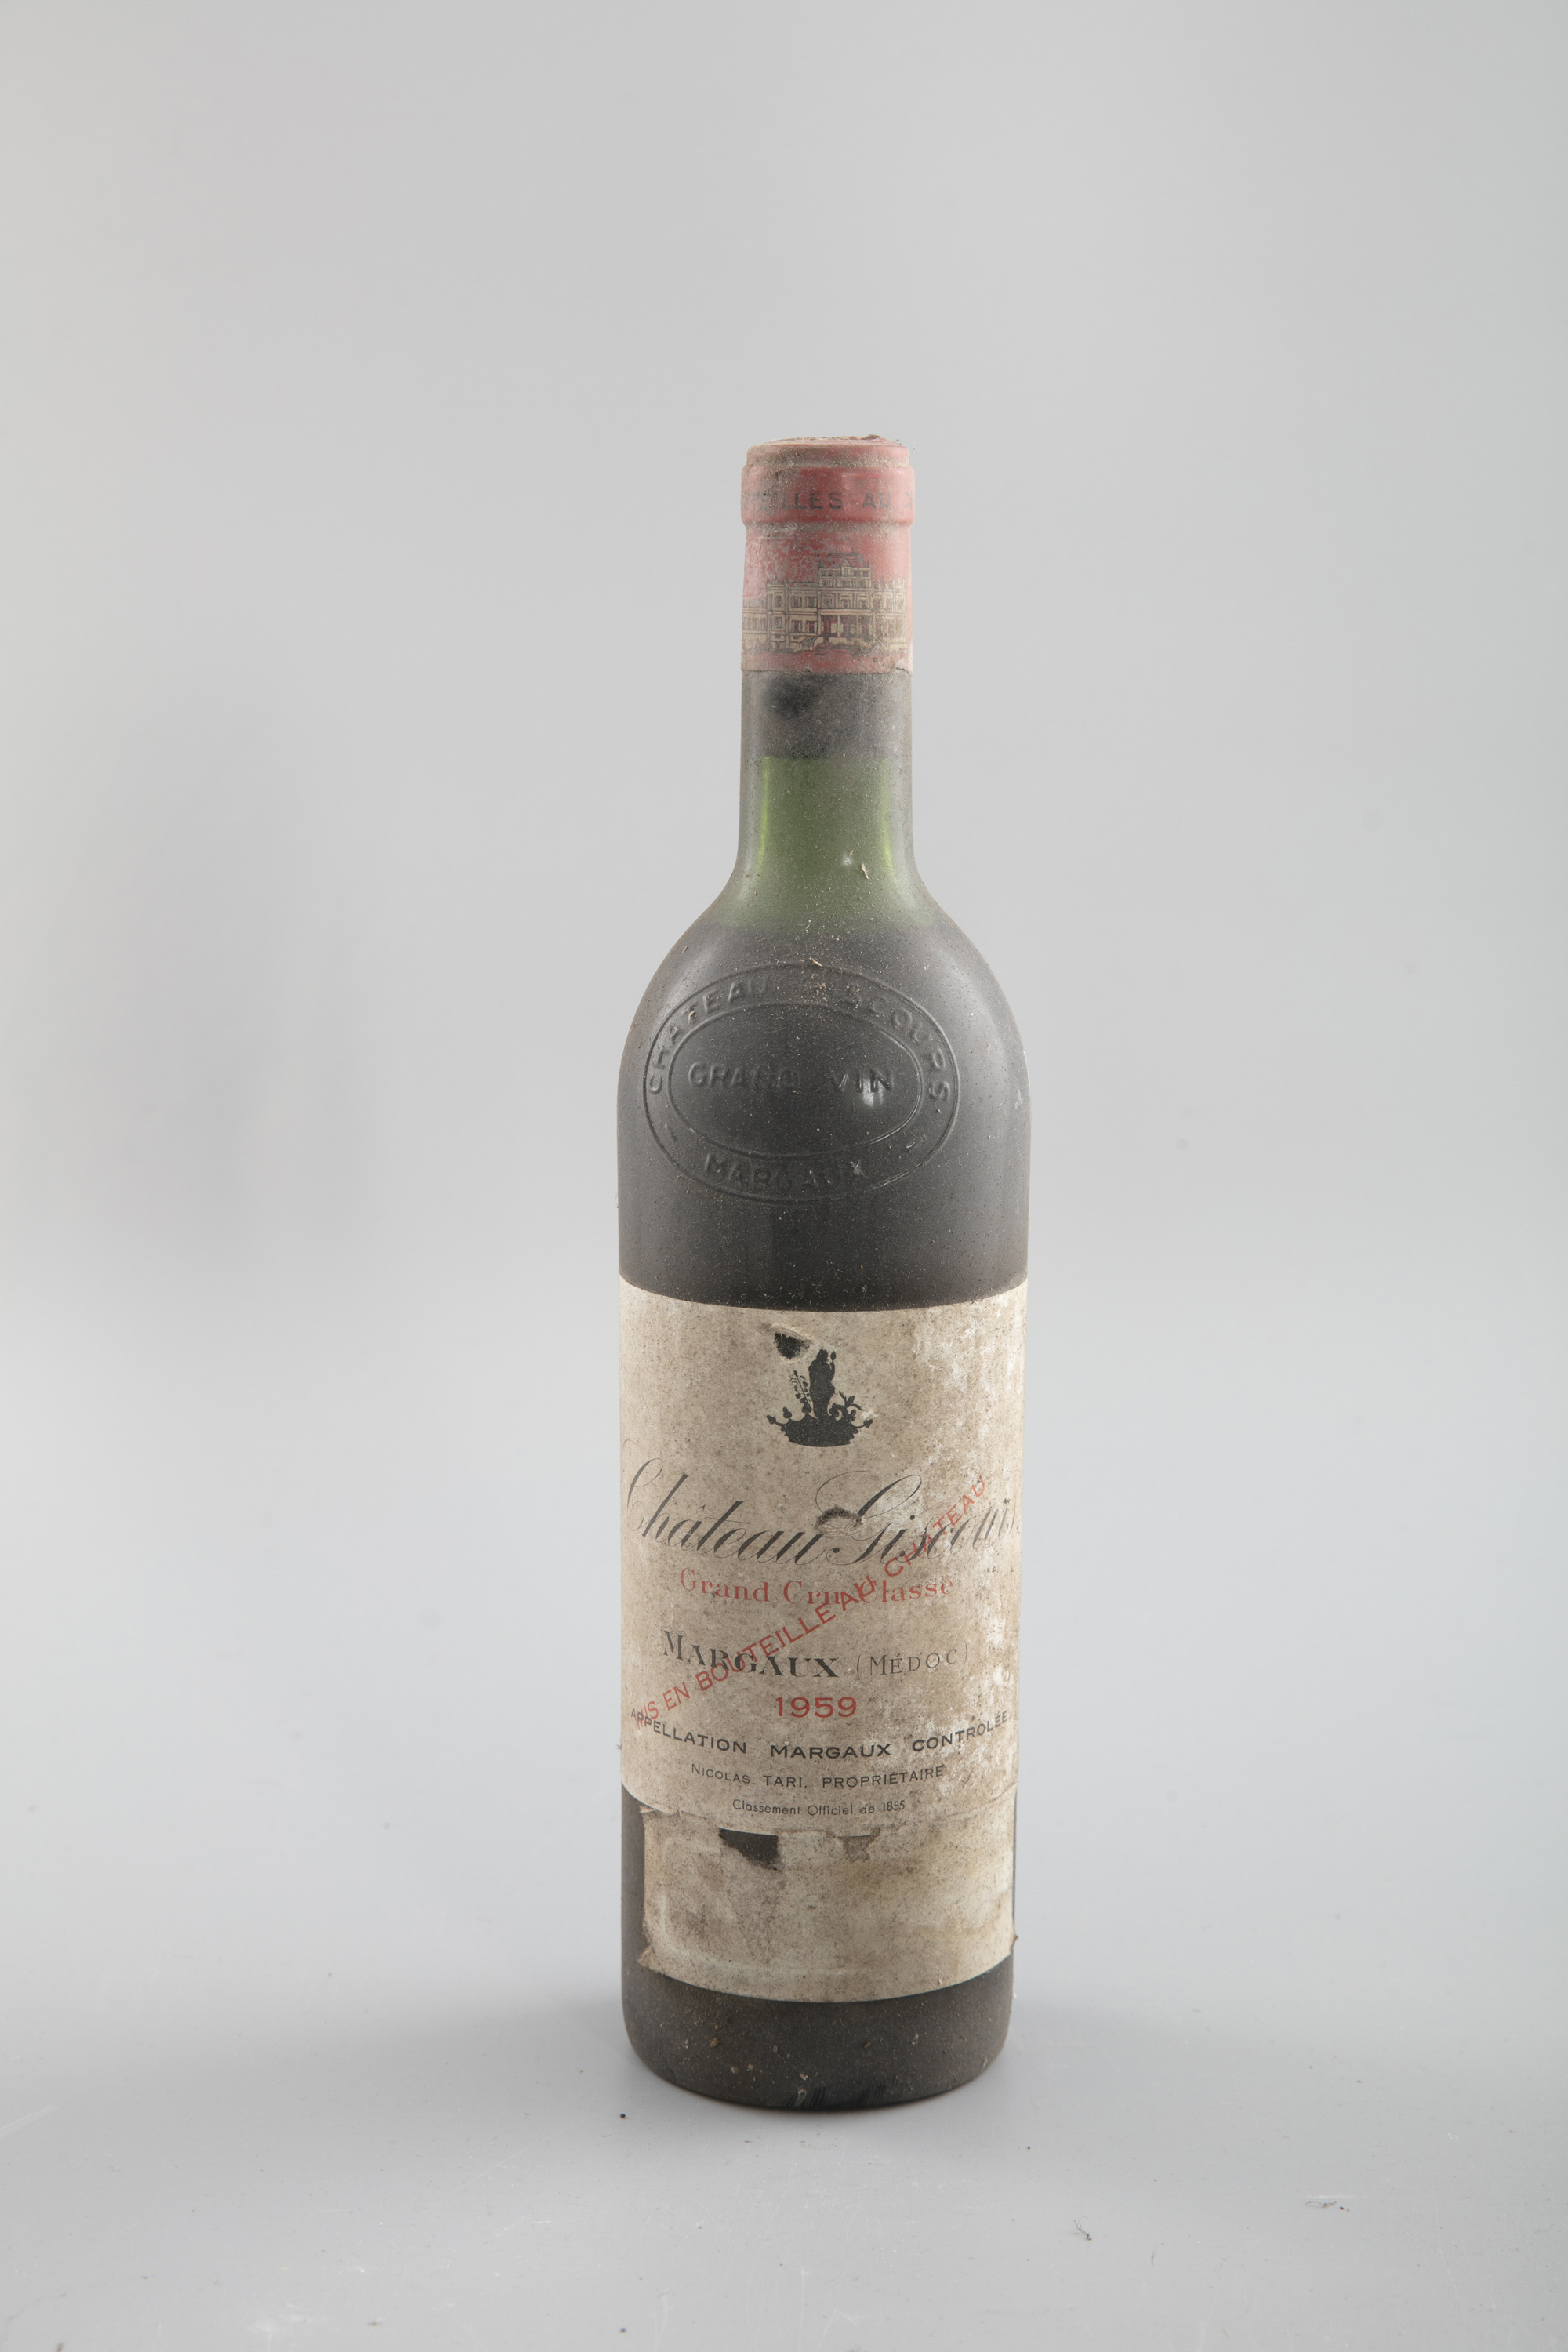 CHATEAUX GISCOURS Margaux 1959 Four bottles Worn label, fair capsules, high shoulder From the Cellar - Image 9 of 12